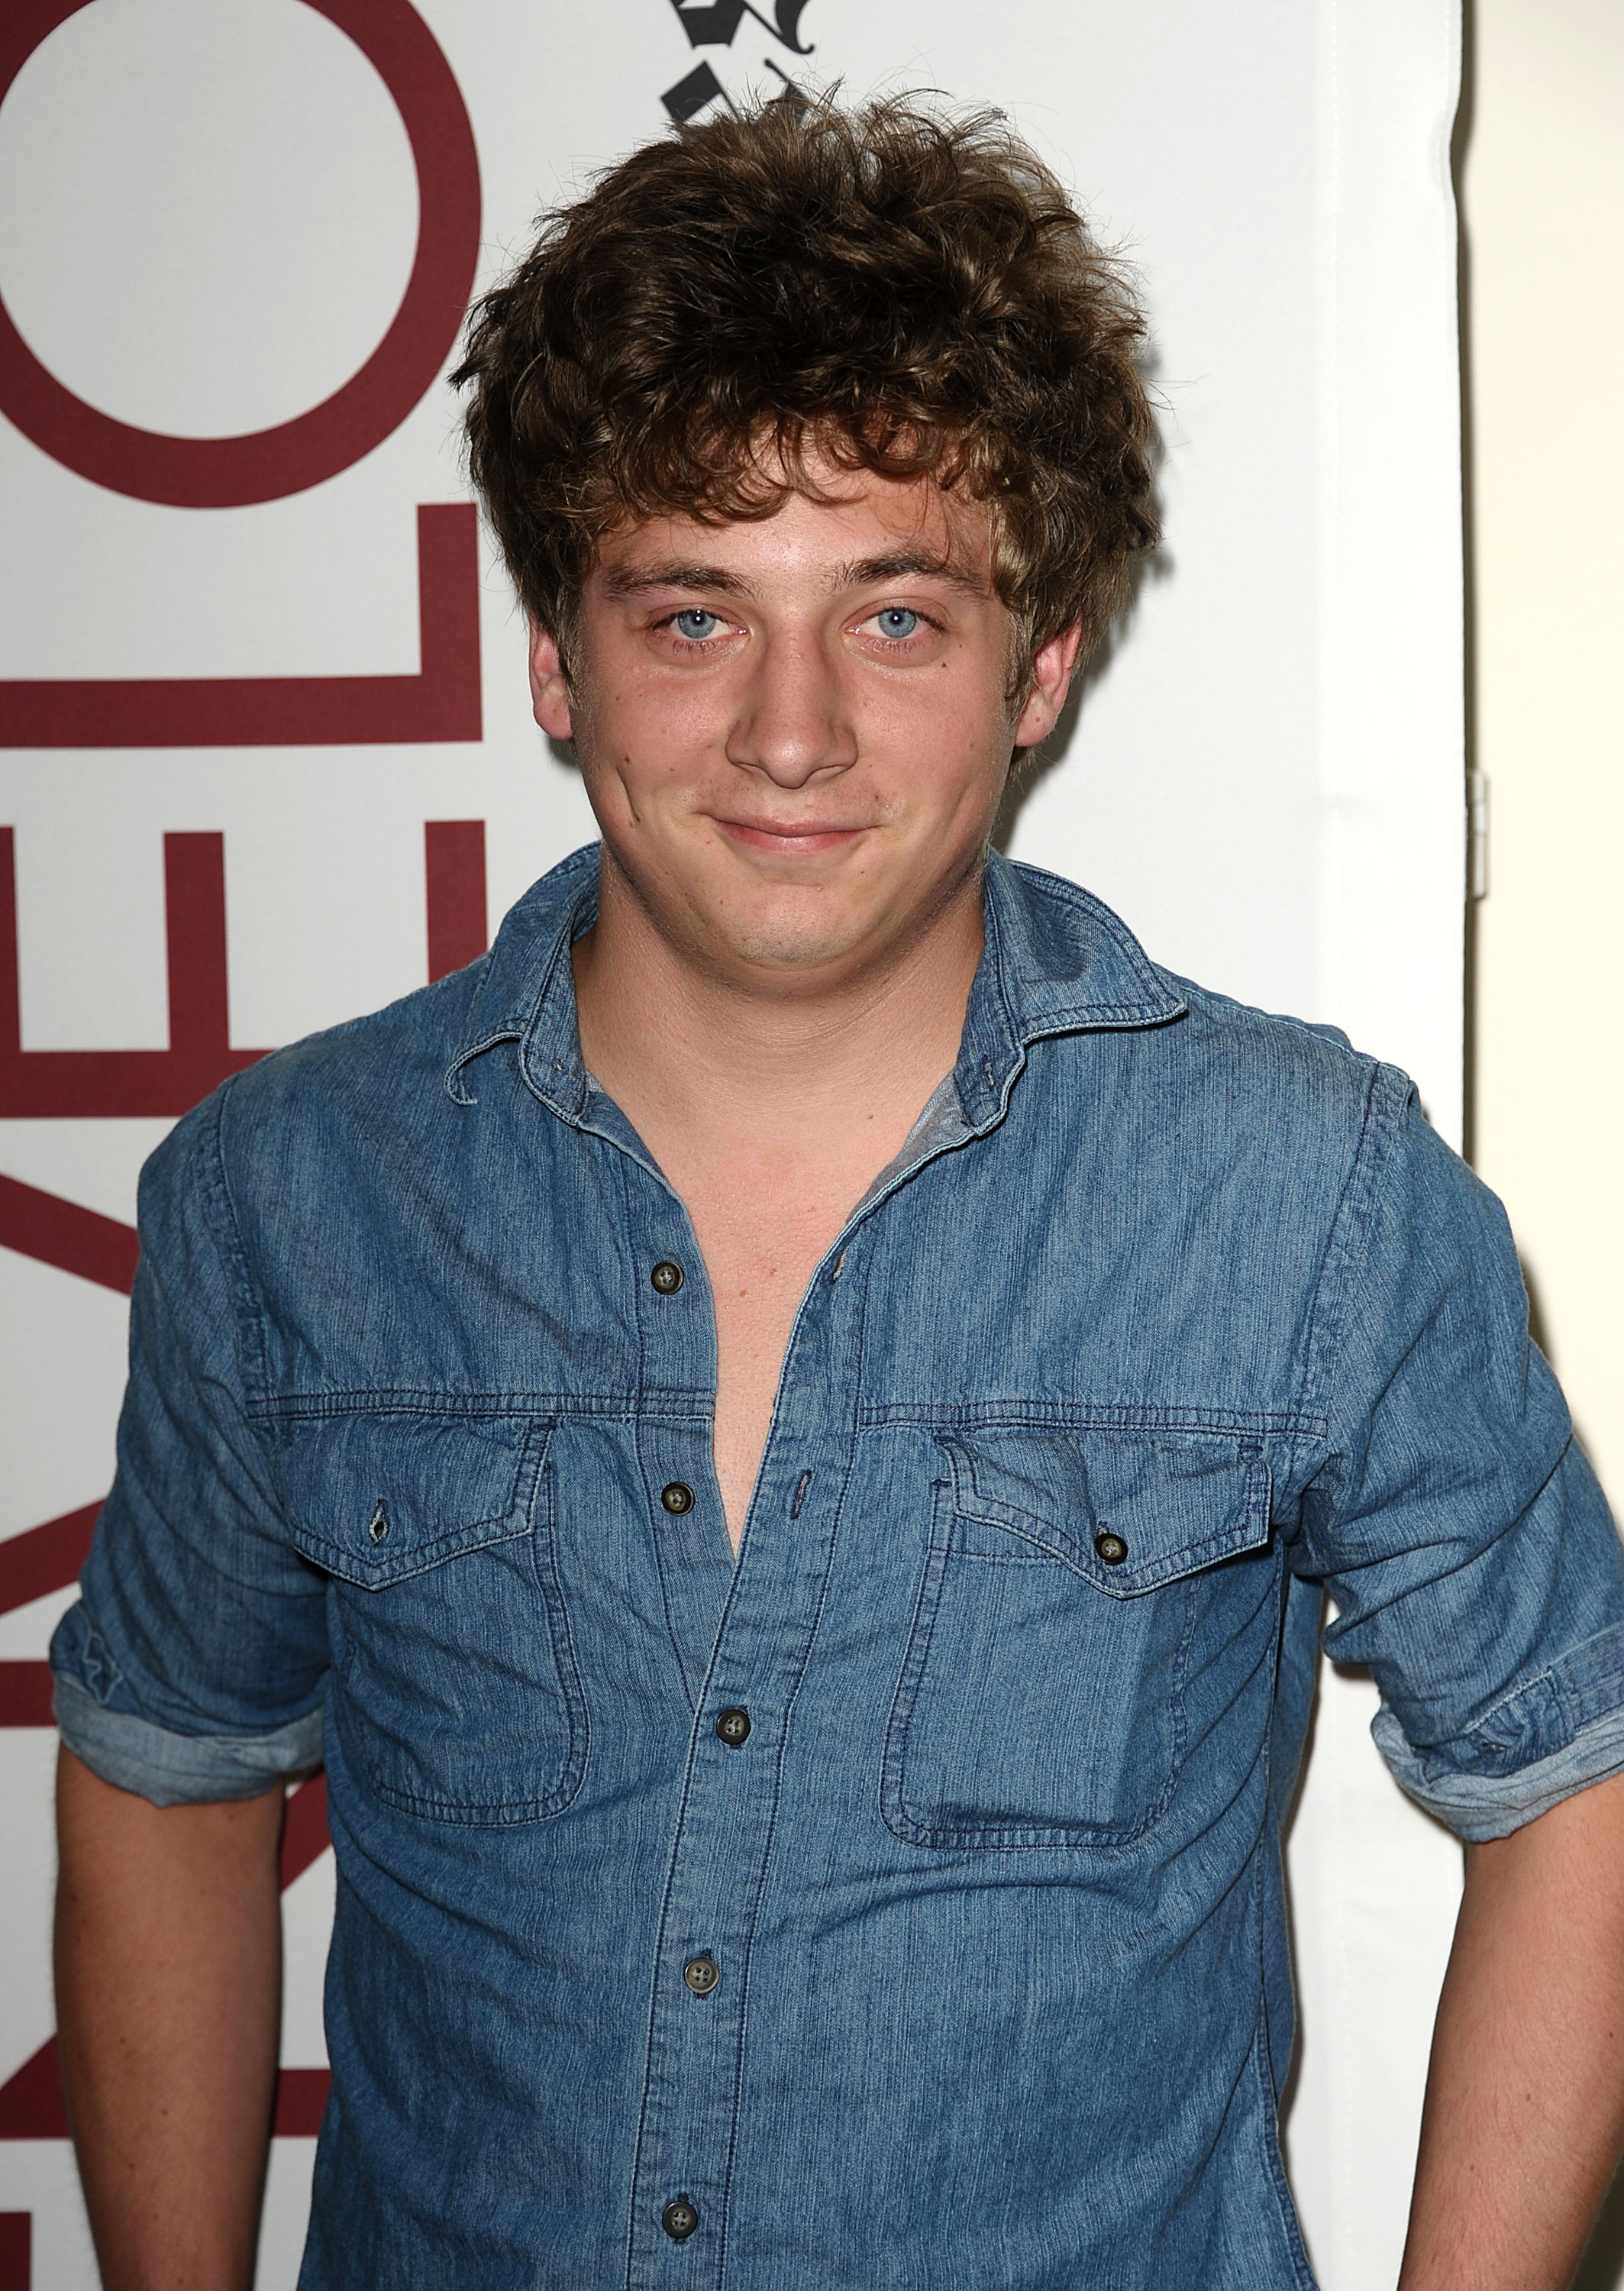 Jeremy Allen White attends the "Shameless" screening on June 2, 2011 in Los Angeles, California. | Source: Getty Images